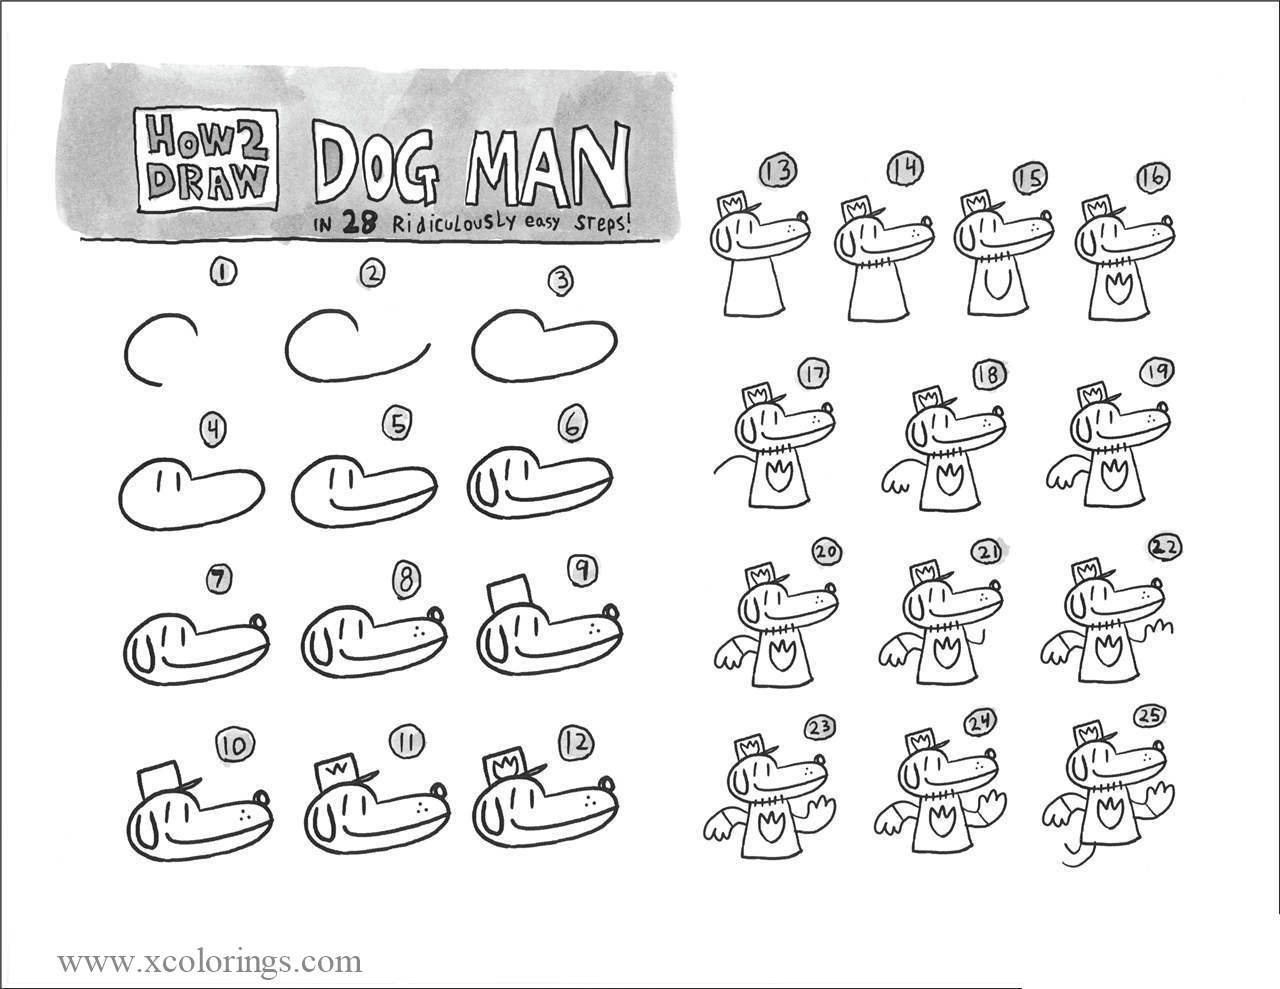 Free How To Draw Dog Man Step By Step Coloring Pages printable